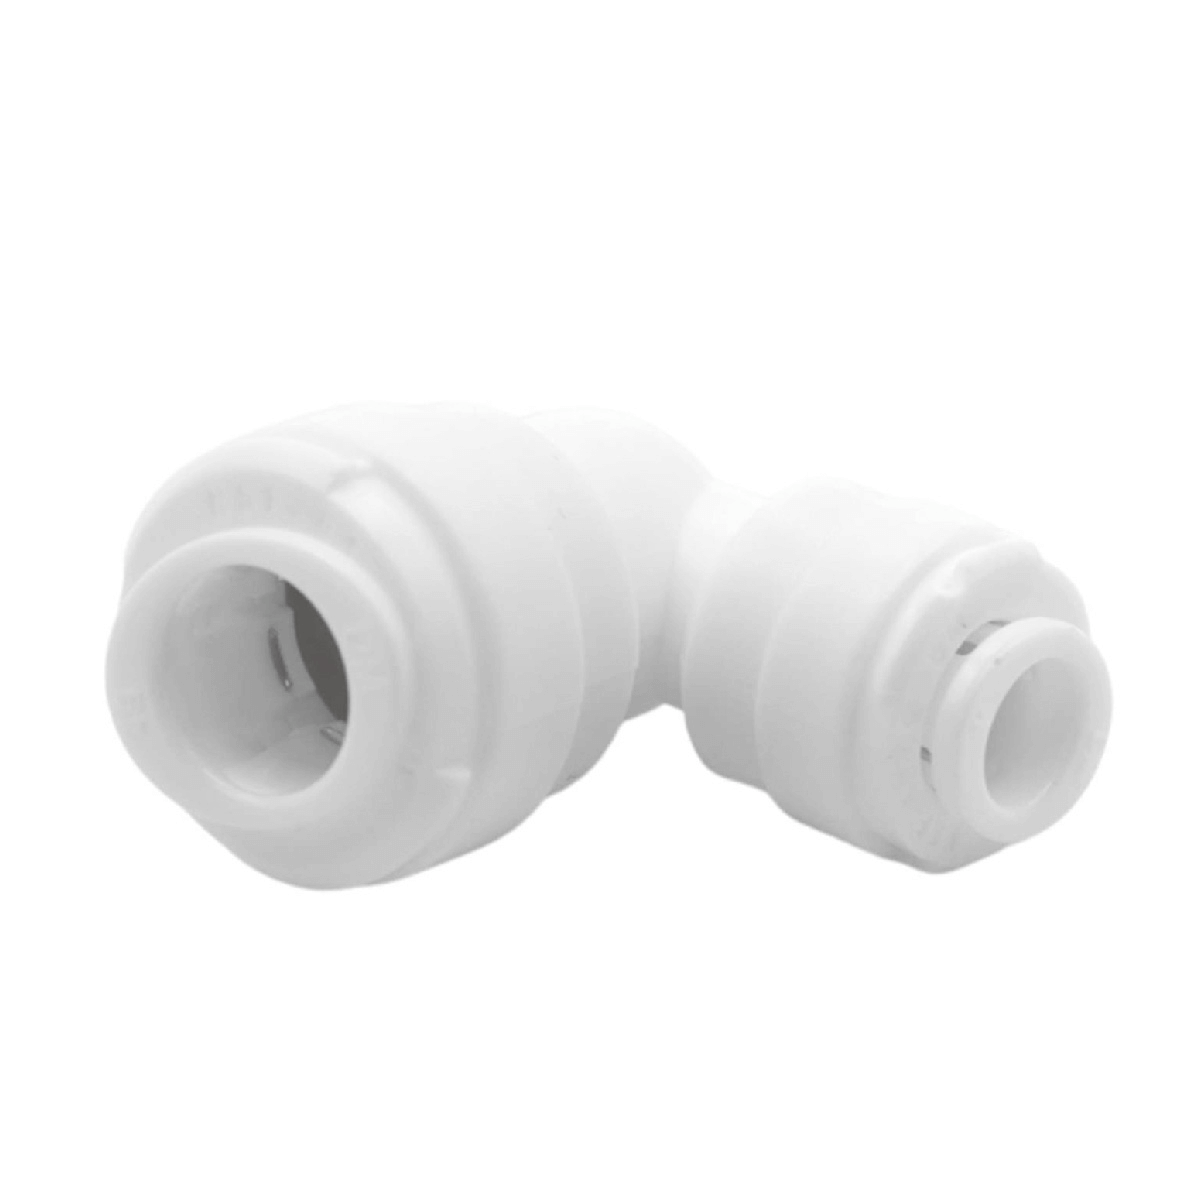 DMfit AEU Acetal Fitting Elbow Union Push-in 1/4" , 3/8",1/2" Tube OD  (10 Pack)